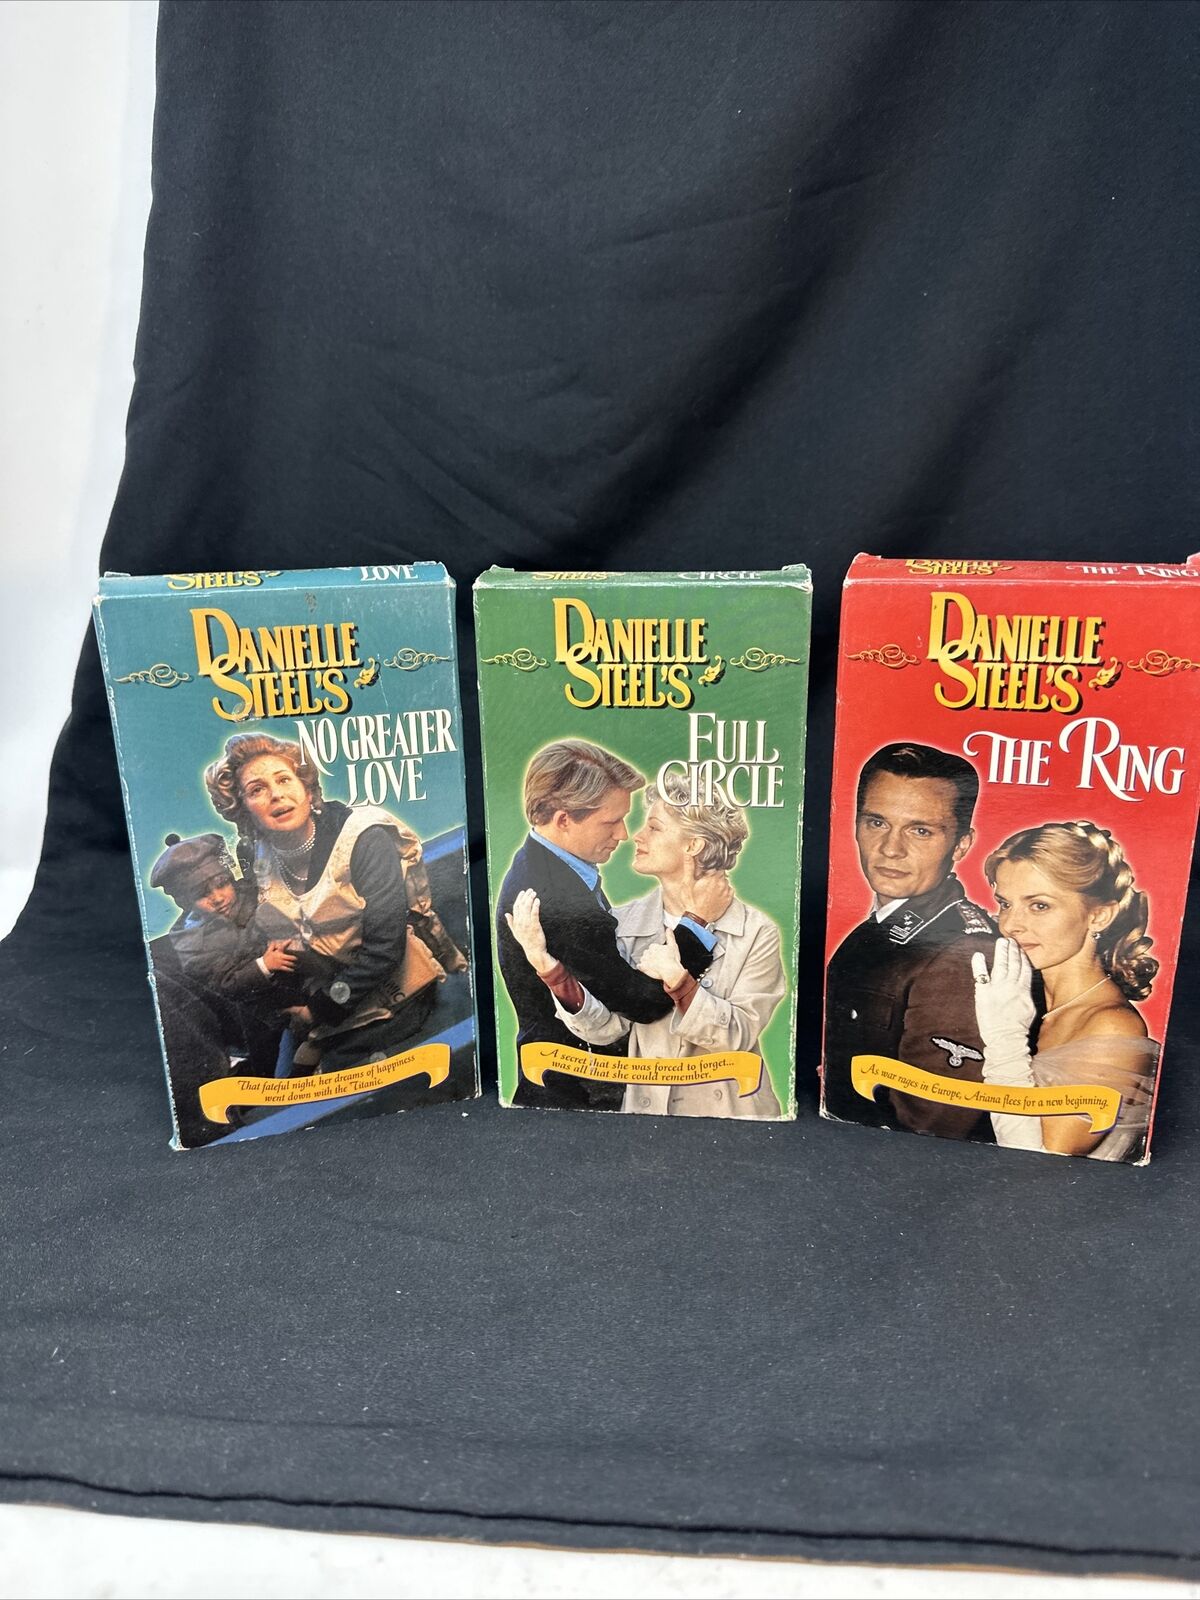 Vintage LOT 3 1990\'s DANIELLE STEEL MOVIE COLLECTION VHS TAPES, EXCELLENT